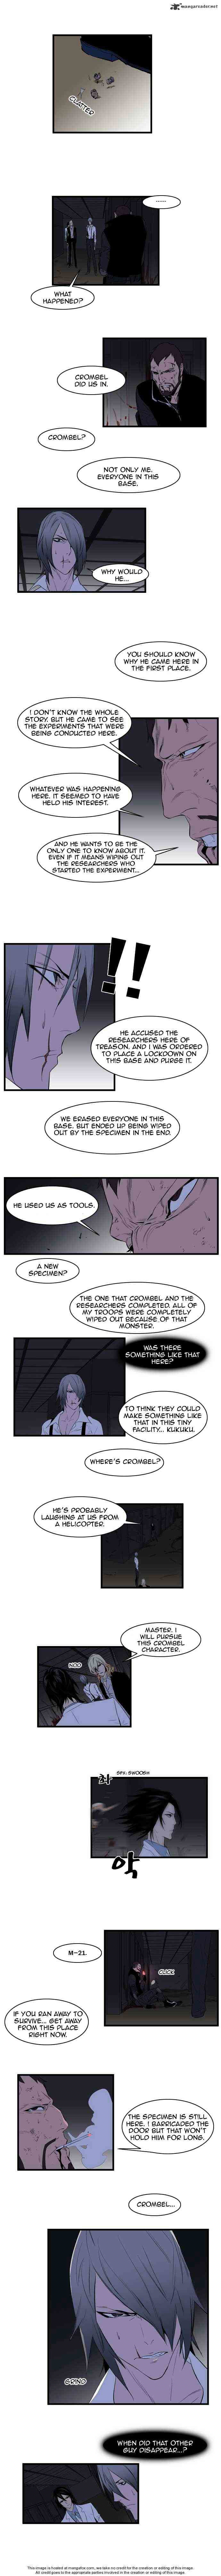 Noblesse Chapter 76 _ Chapters 76-90 page 67